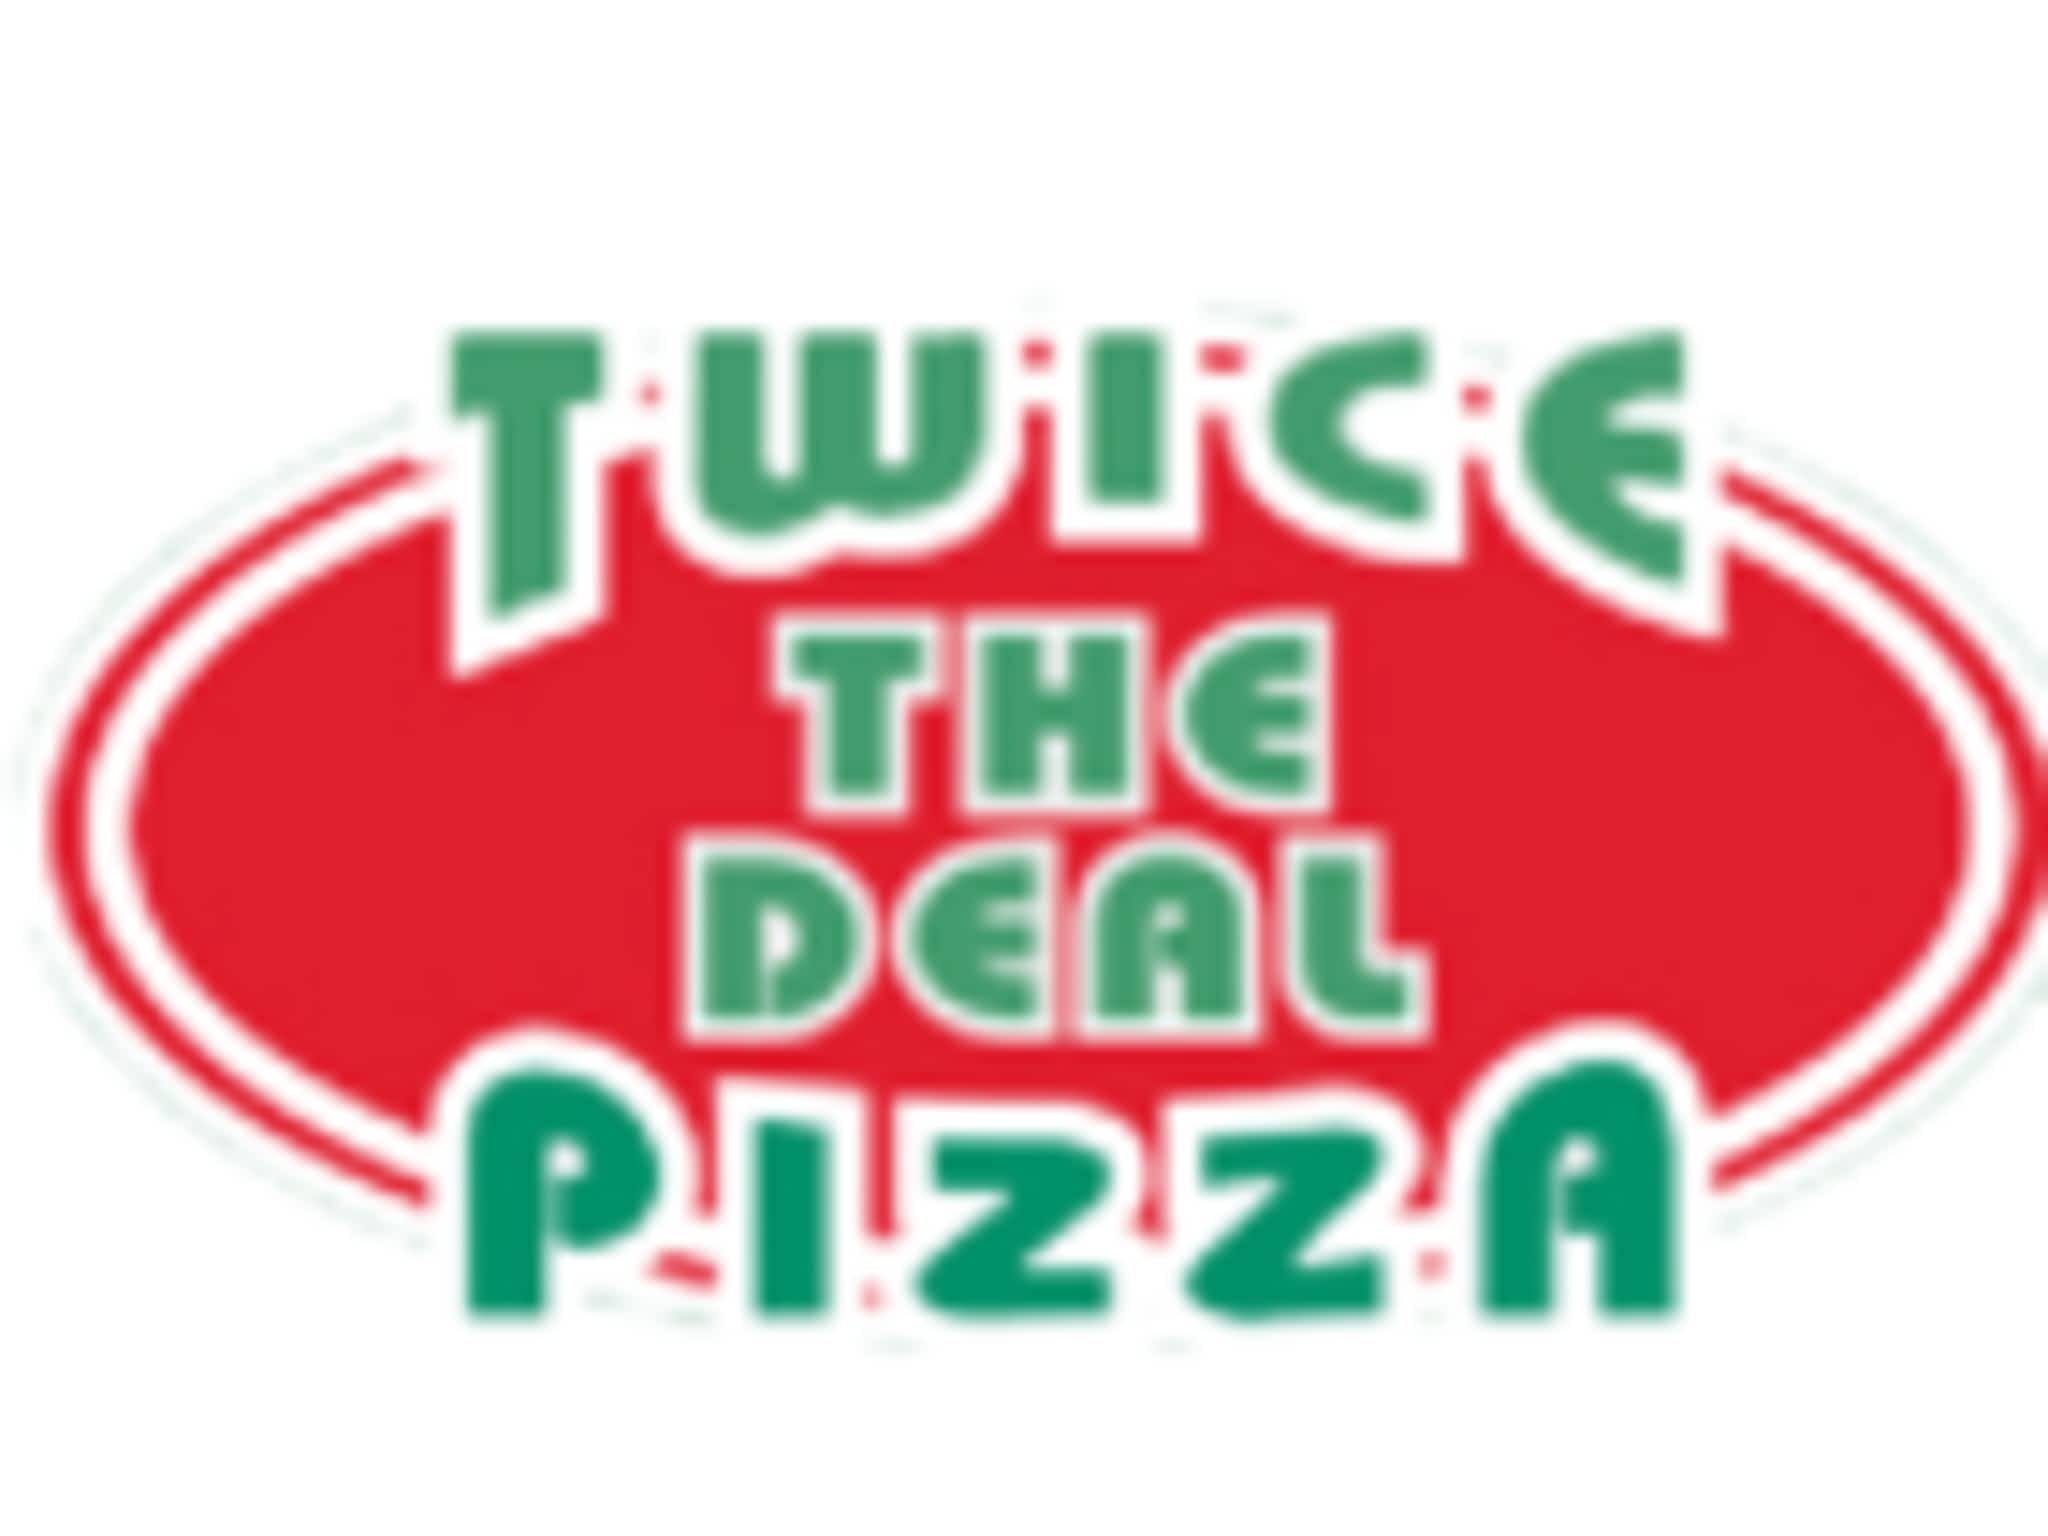 photo Twice The Deal Pizza